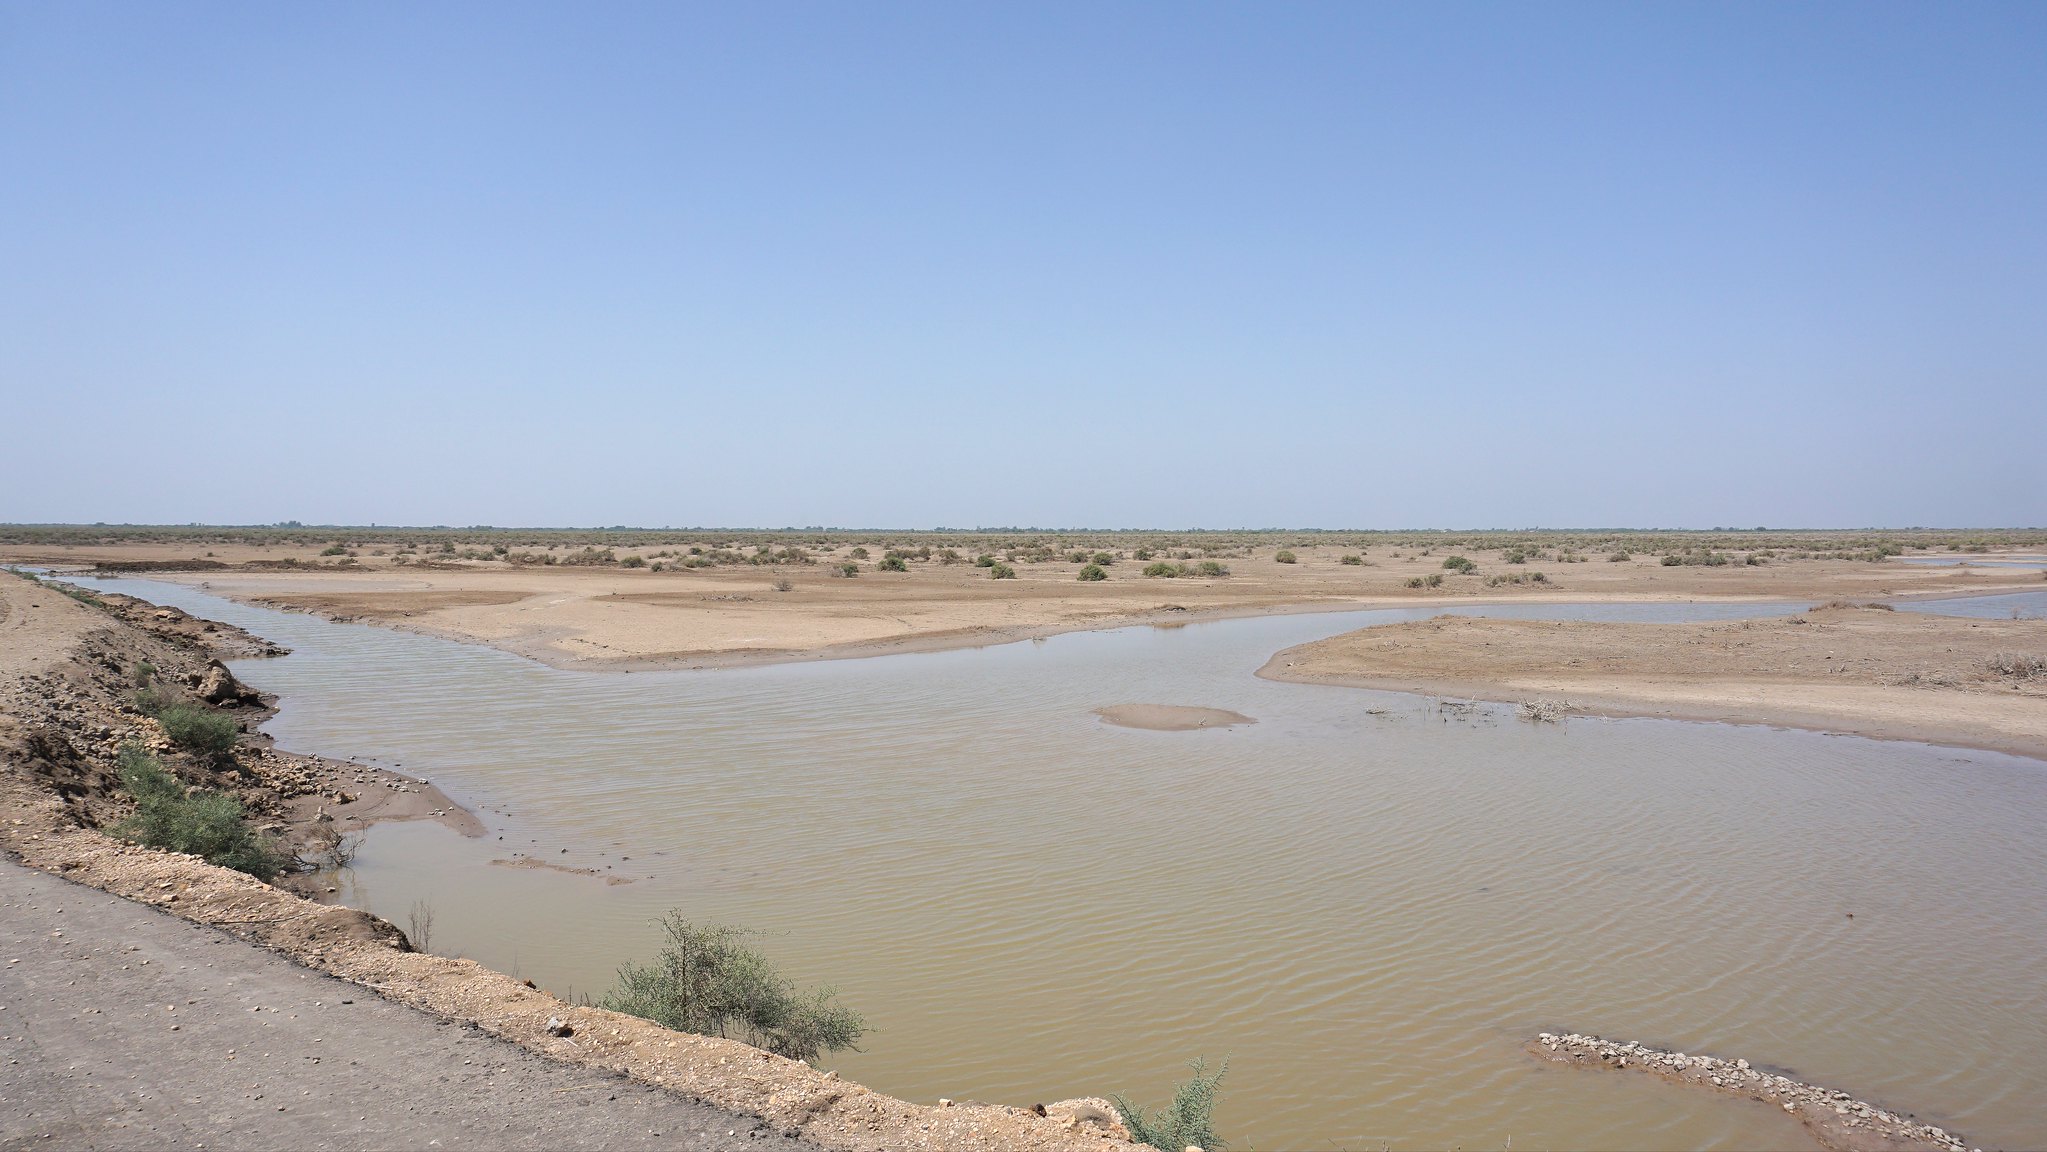 <p>The barrage is planned to be constructed on the Indus River near Thatta. Image source: Muhammad Imran Saeed</p>